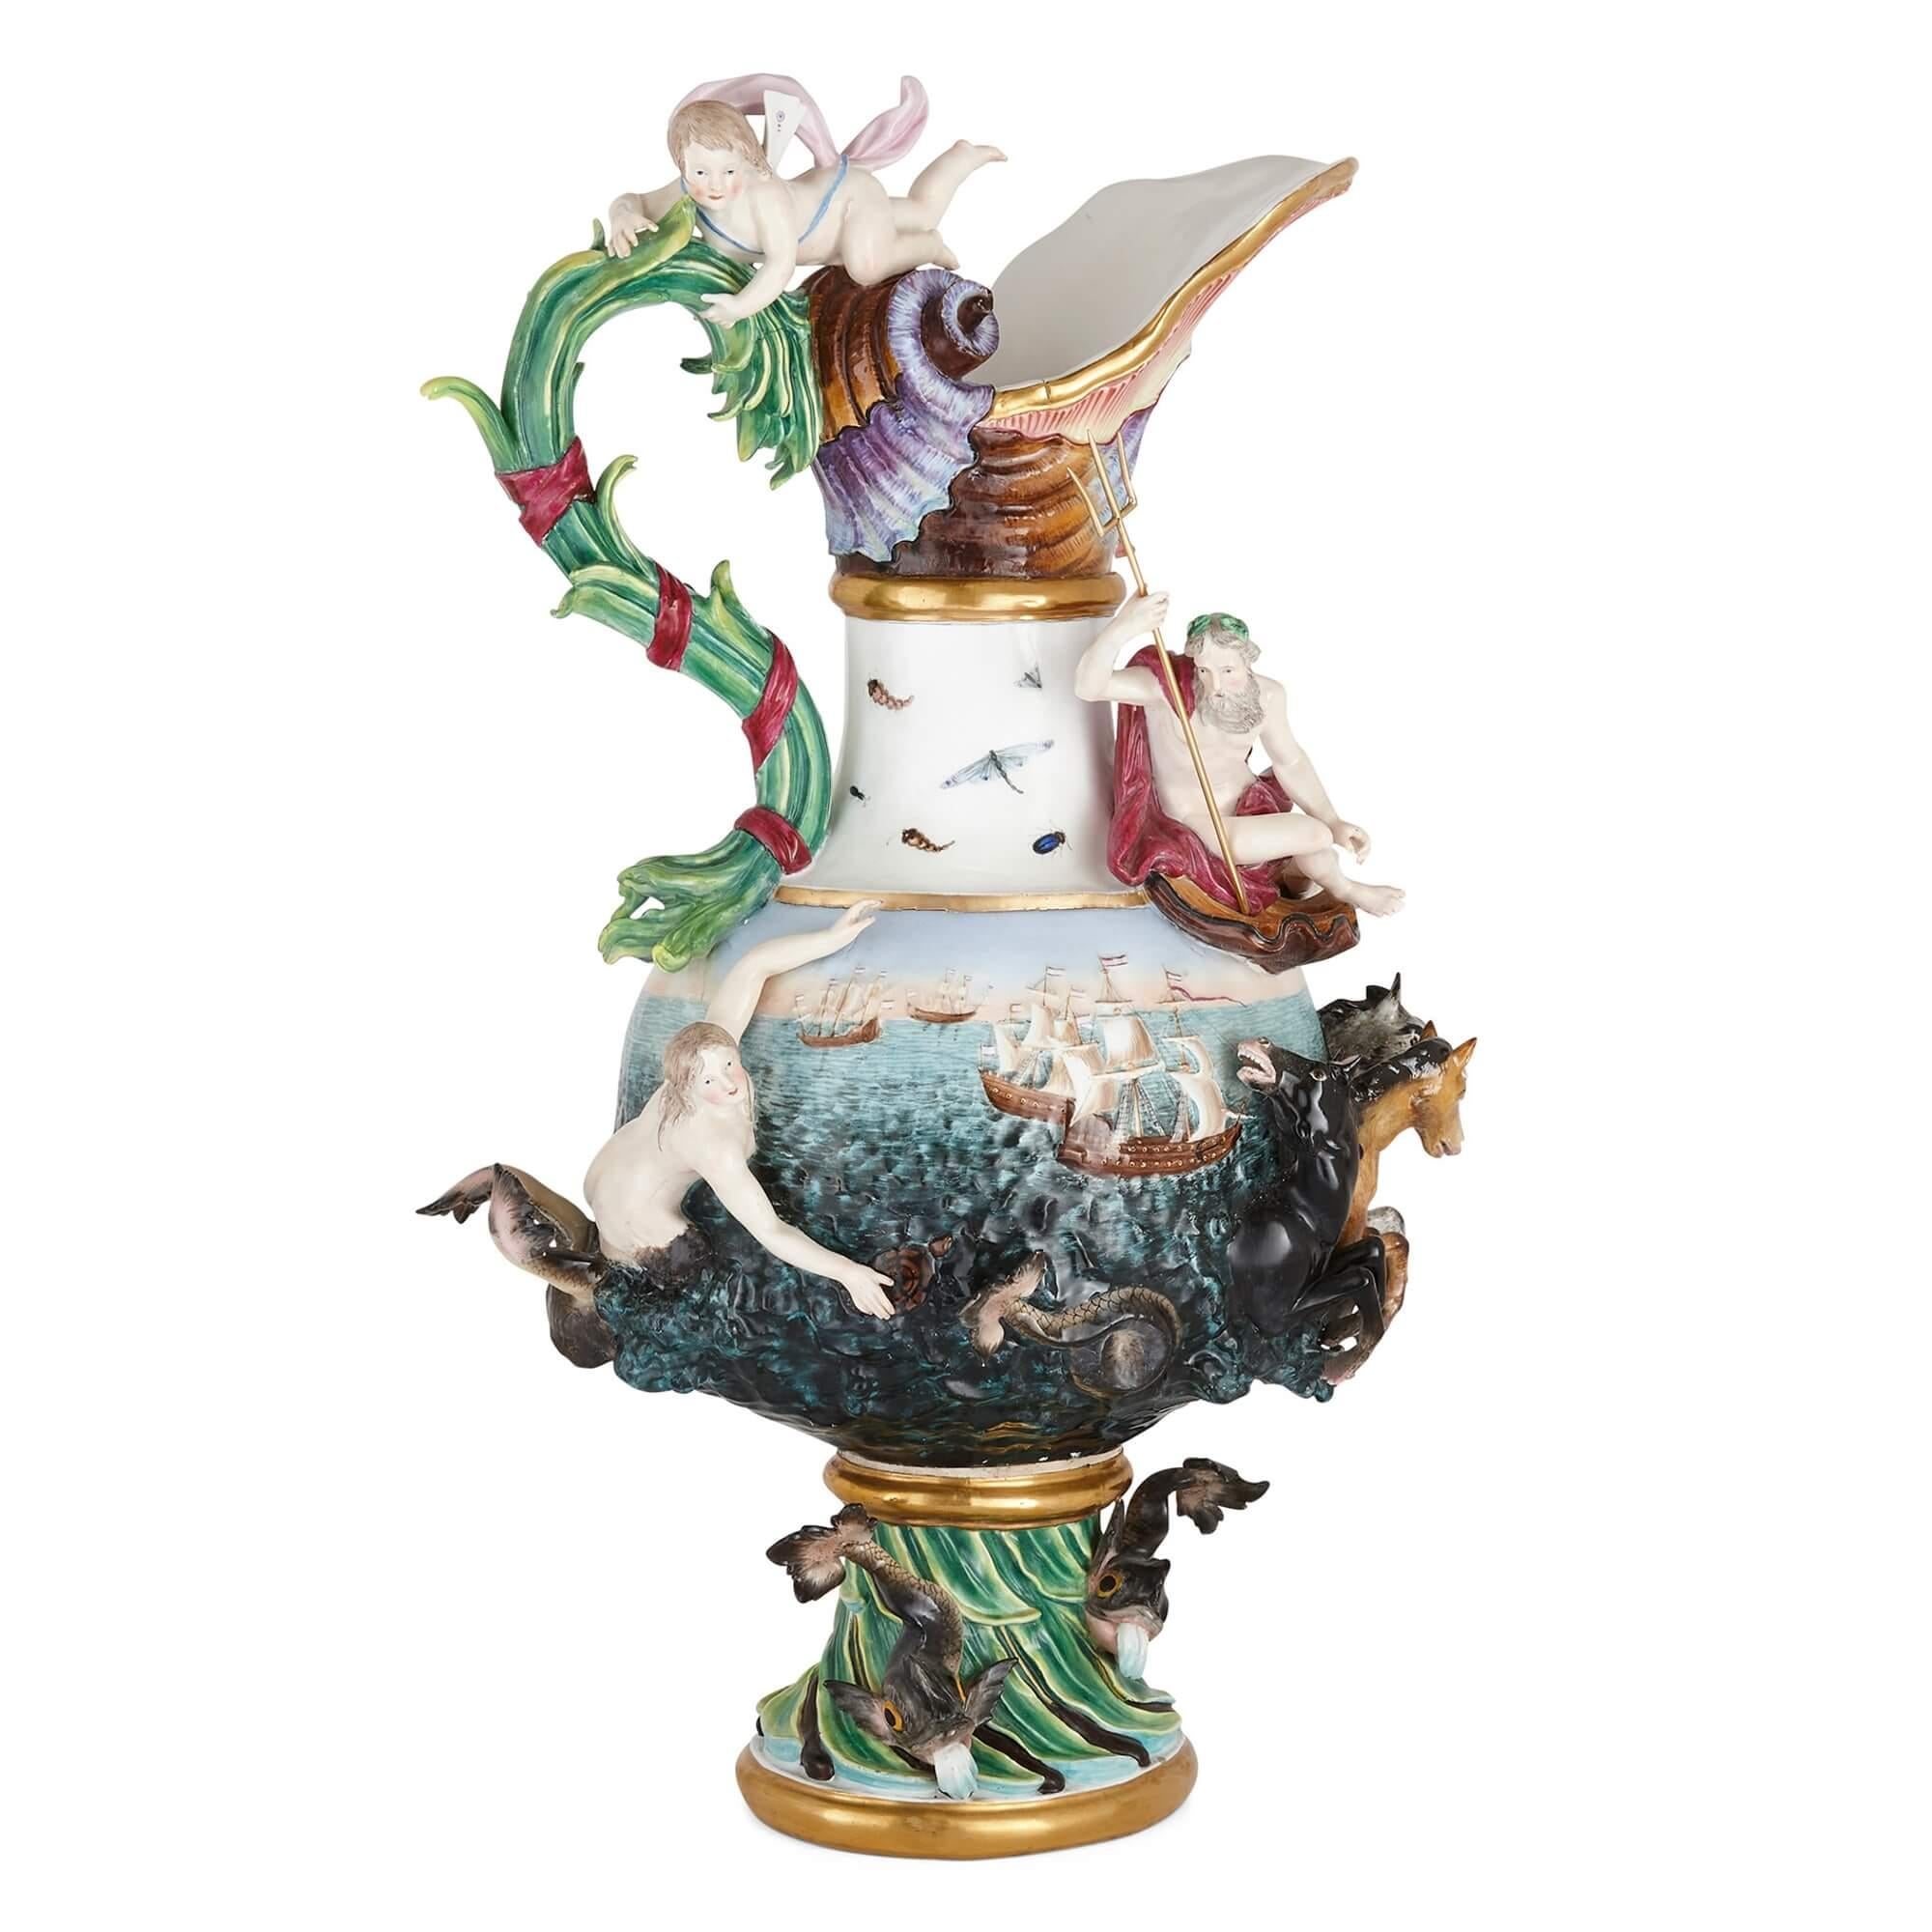 German Large Porcelain ‘Water’ Ewer from the ‘Elements’ Series by Meissen